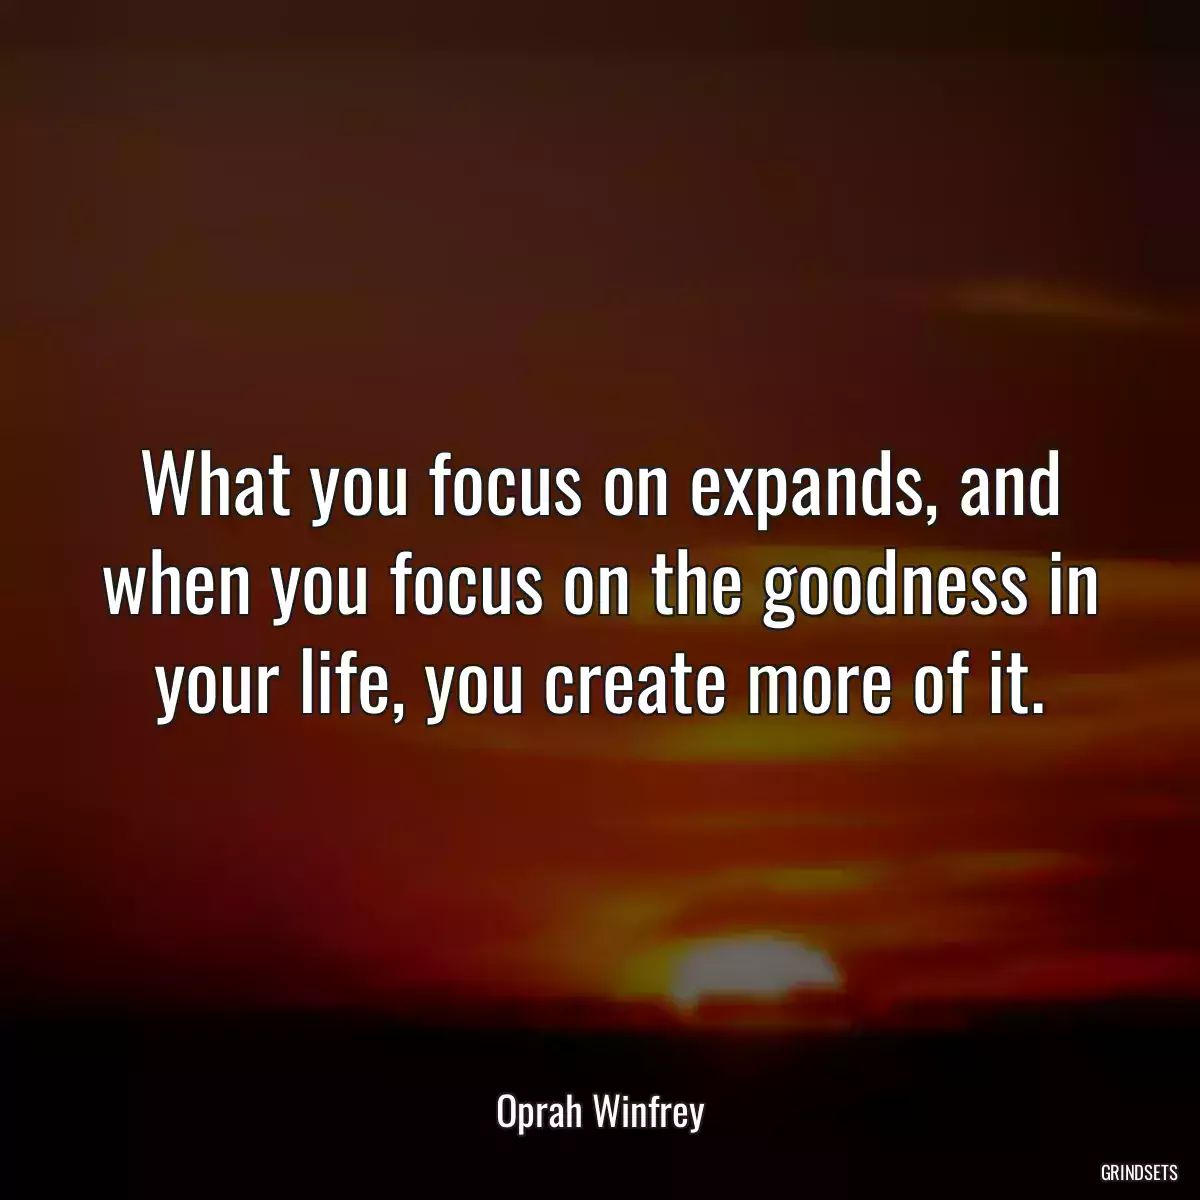 What you focus on expands, and when you focus on the goodness in your life, you create more of it.